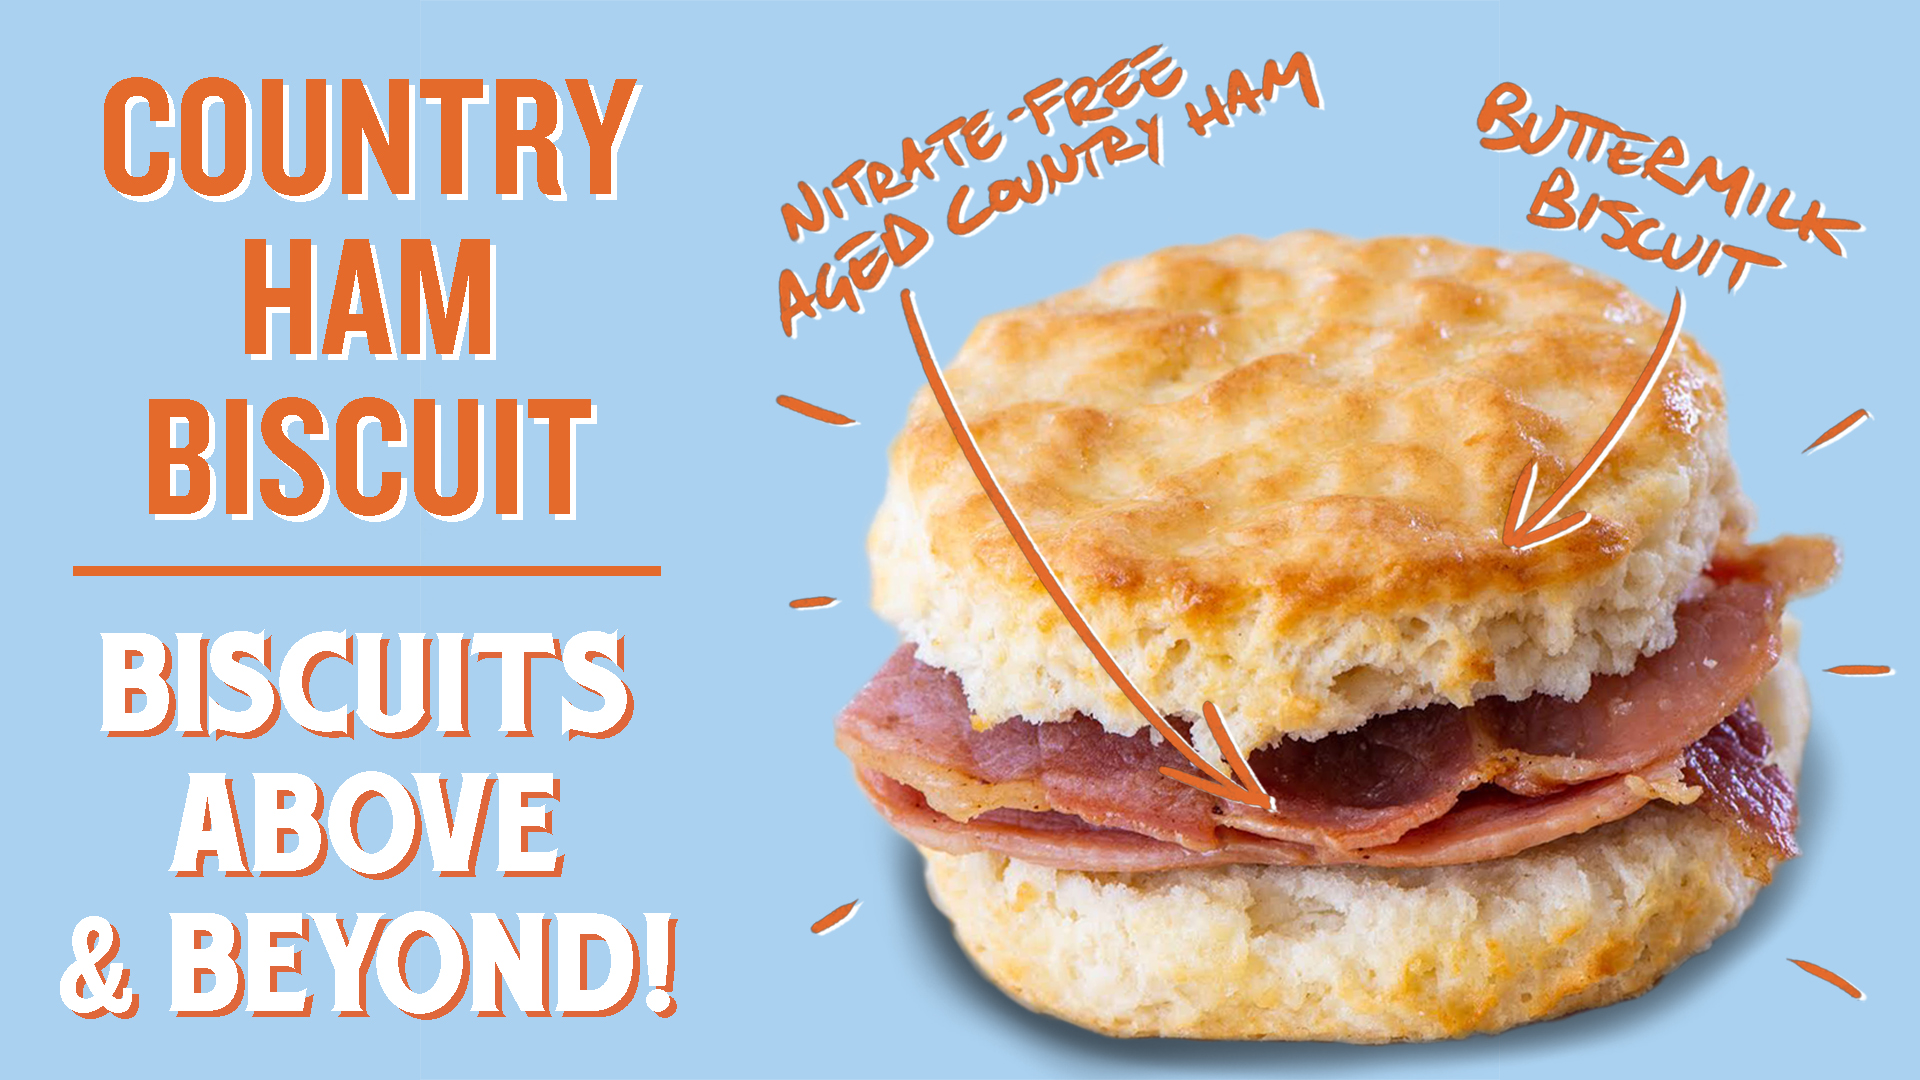 Rise_biscuitsscreens_countryham